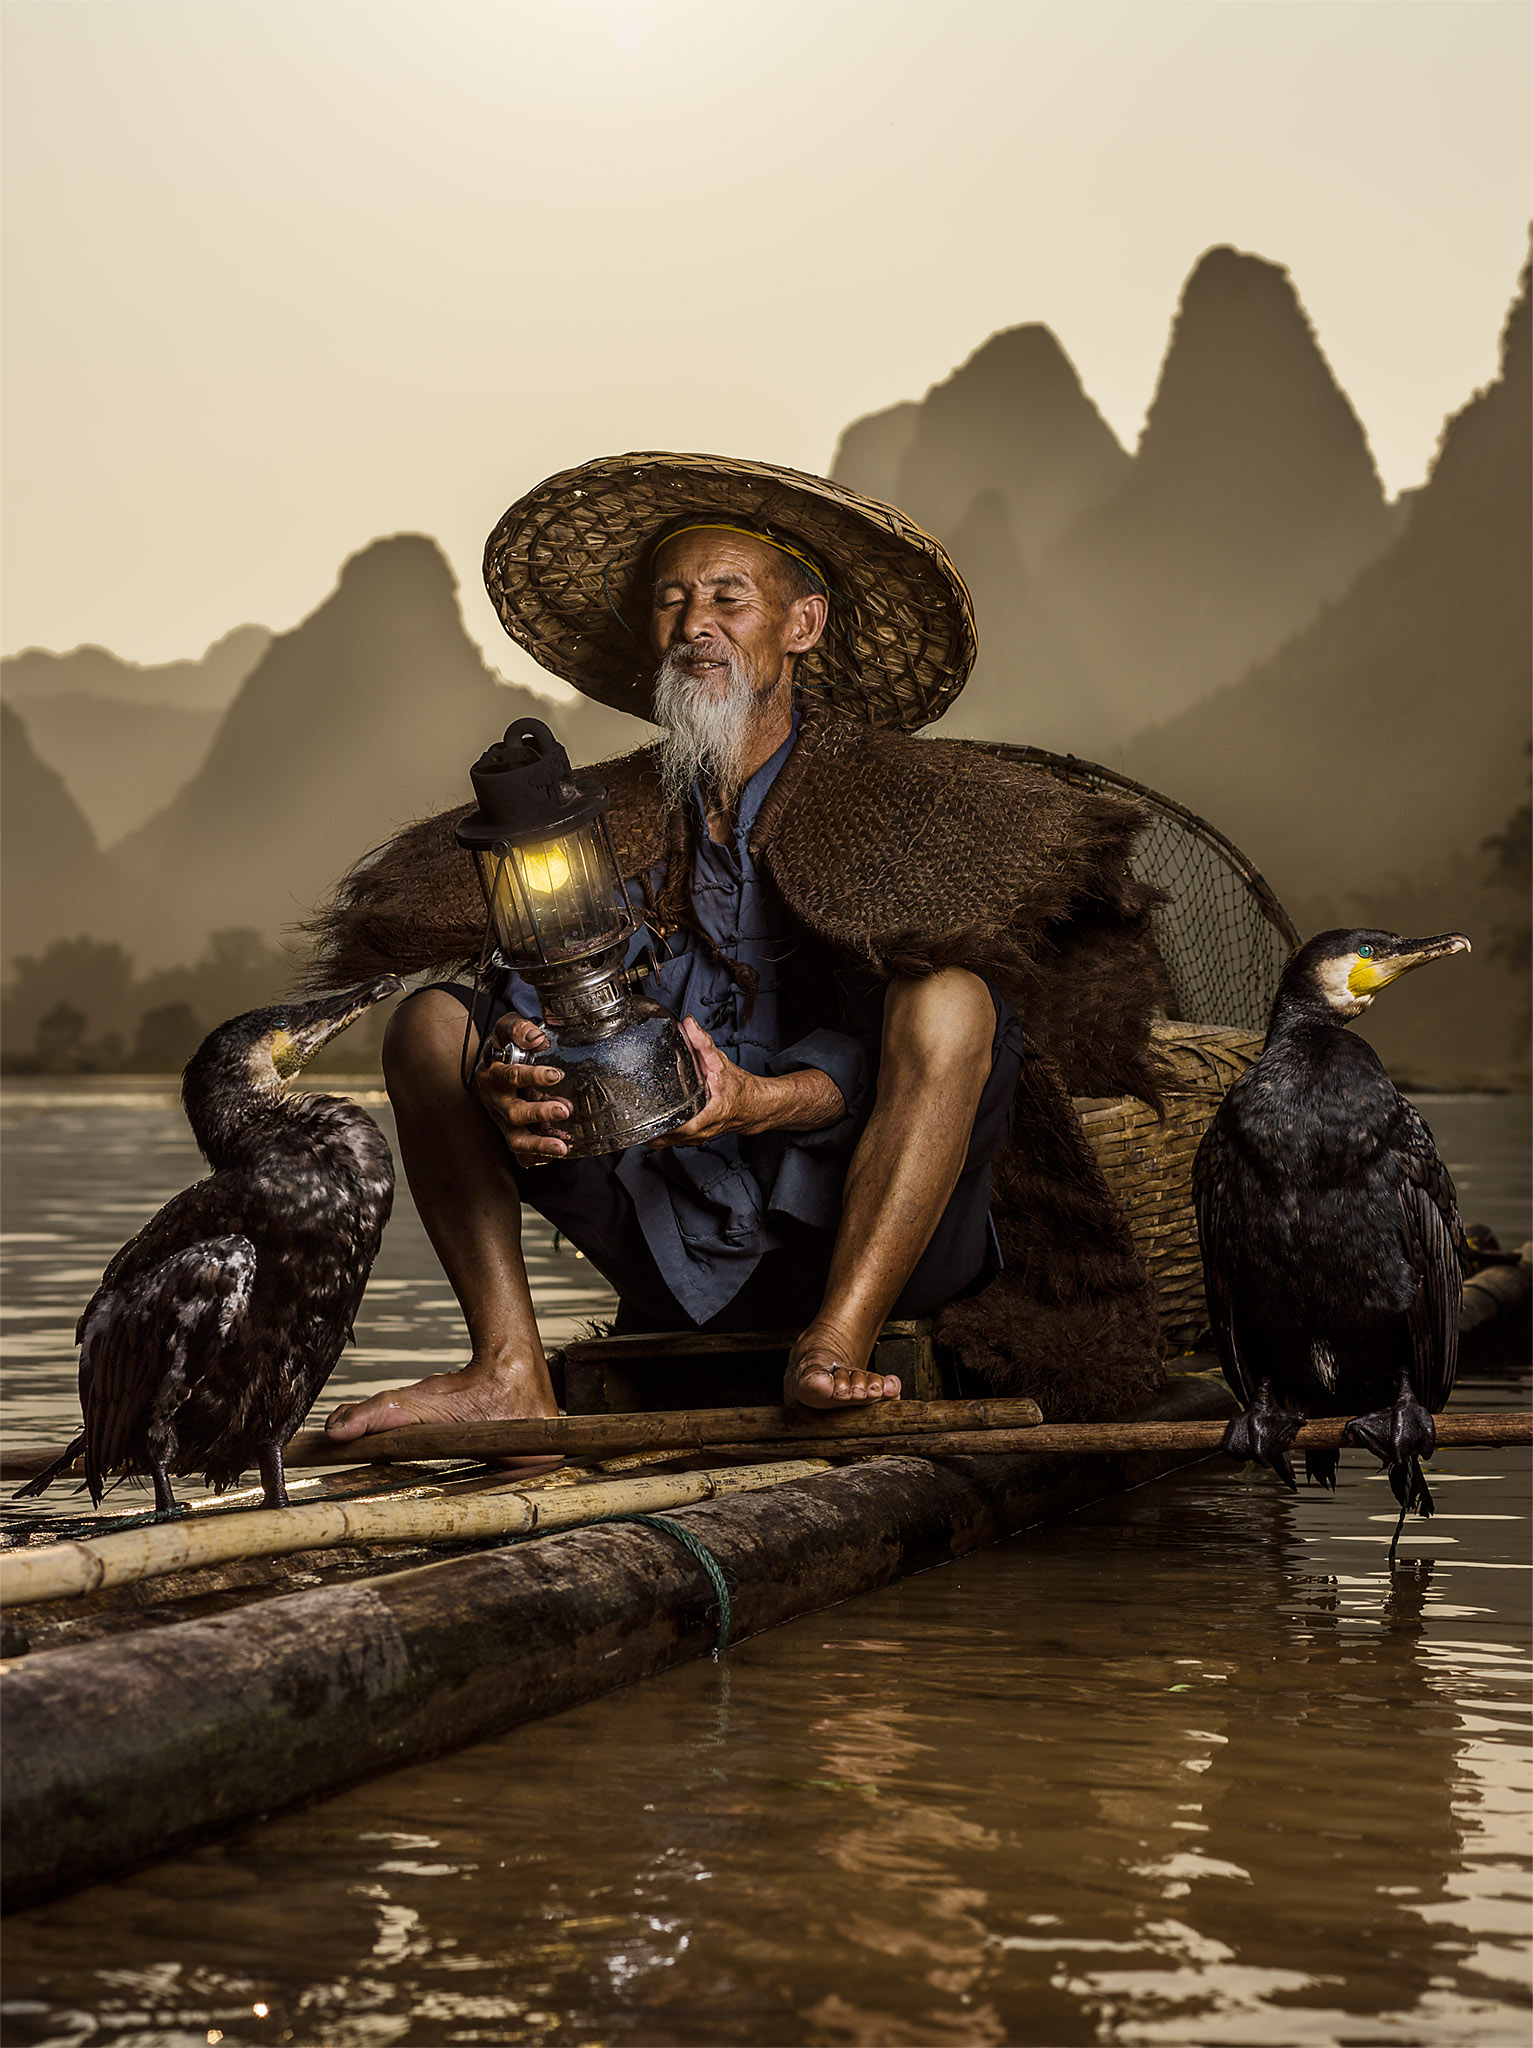 He cannot fish anymore for profit, so he has turned his life to the tourism, he offers his birds to pose for photos with chinese tourists who visit the area.